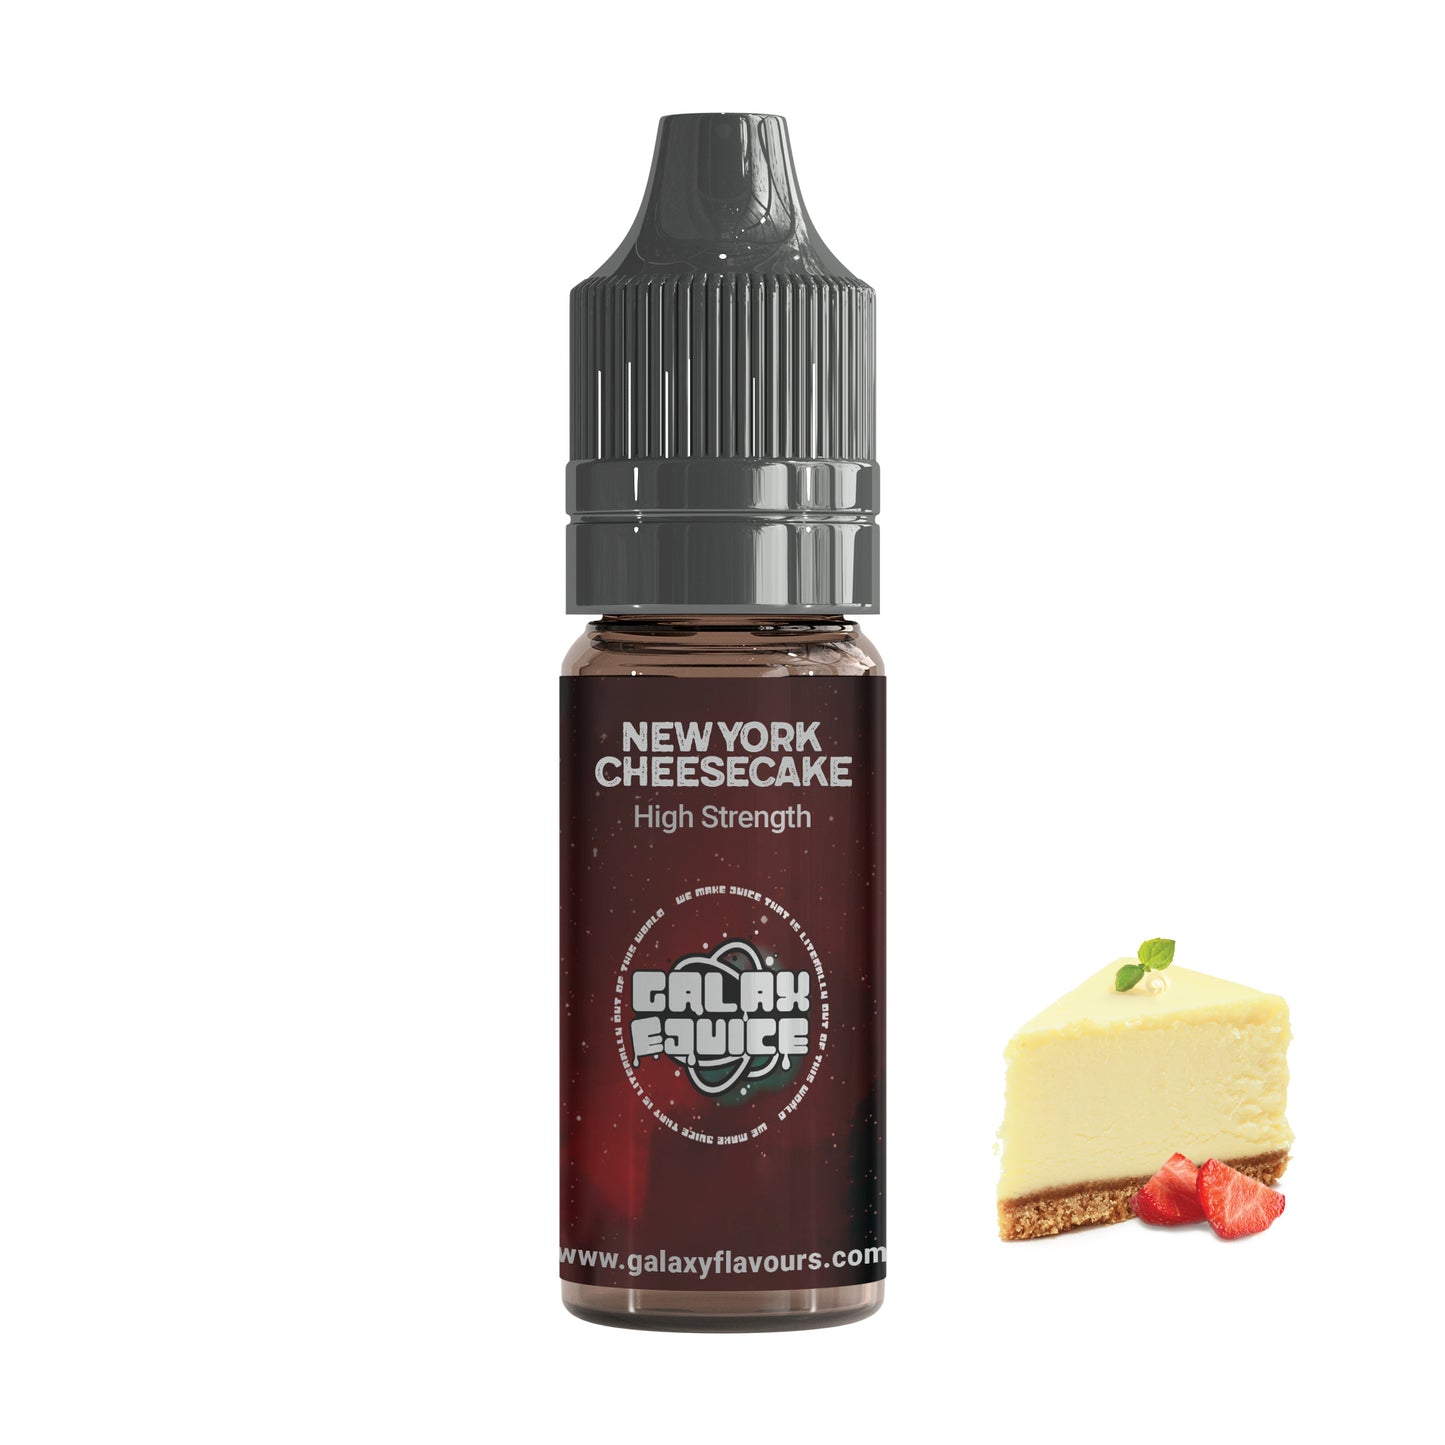 New York Cheesecake High Strength Professional Flavouring.